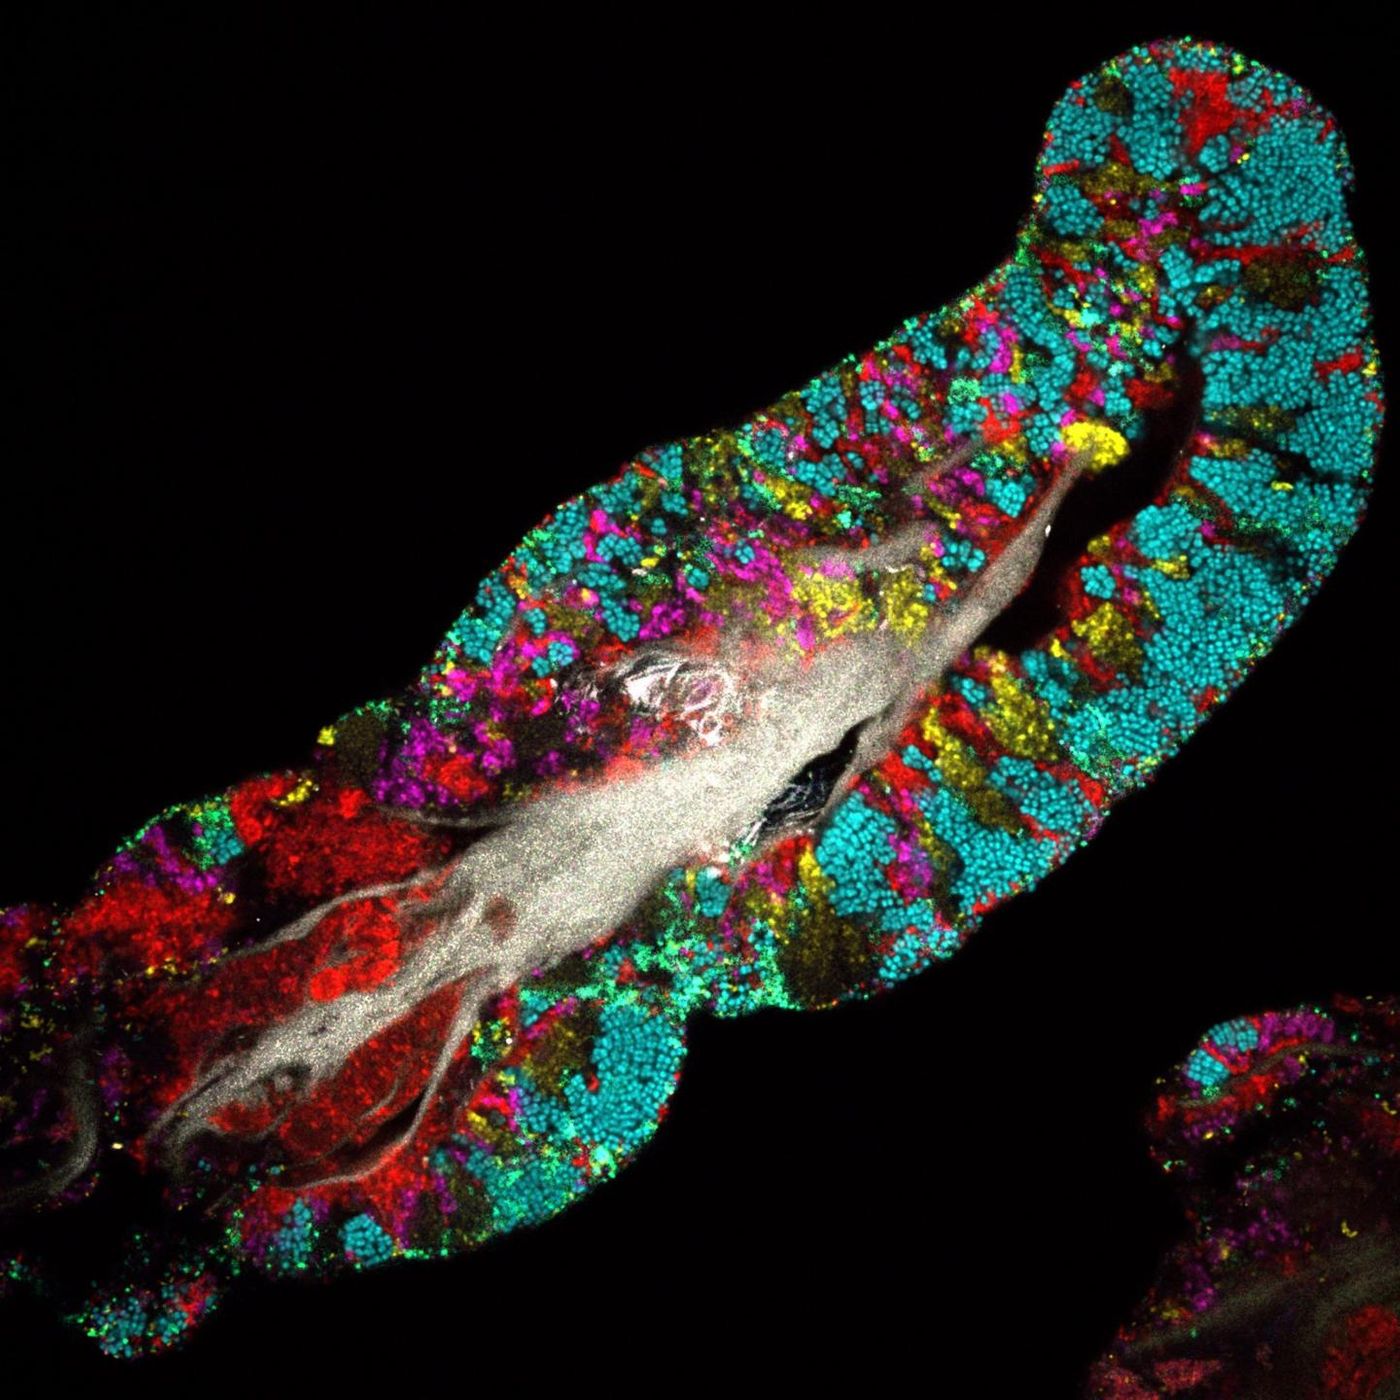 Each color represents a different type of microbe. The white material in the core represents the remnants of human tongue cells about which the microbes grow. / Credit: Steven Wilbert, Gary Borisy, Forsyth Institute; Jessica Mark Welch, Marine Biological Laboratory